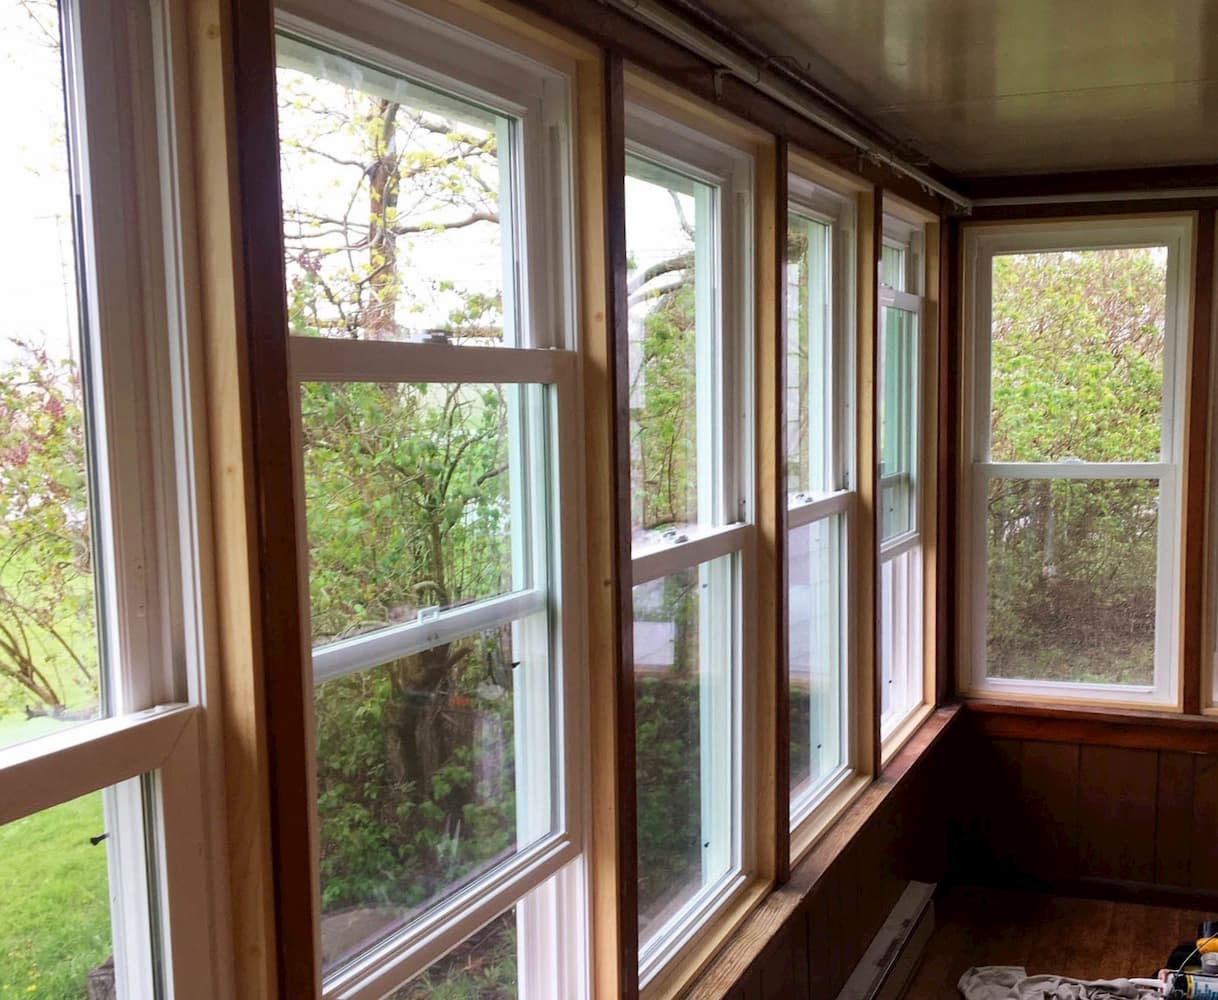 Interior view of new vinyl double-hung windows on a sun porch